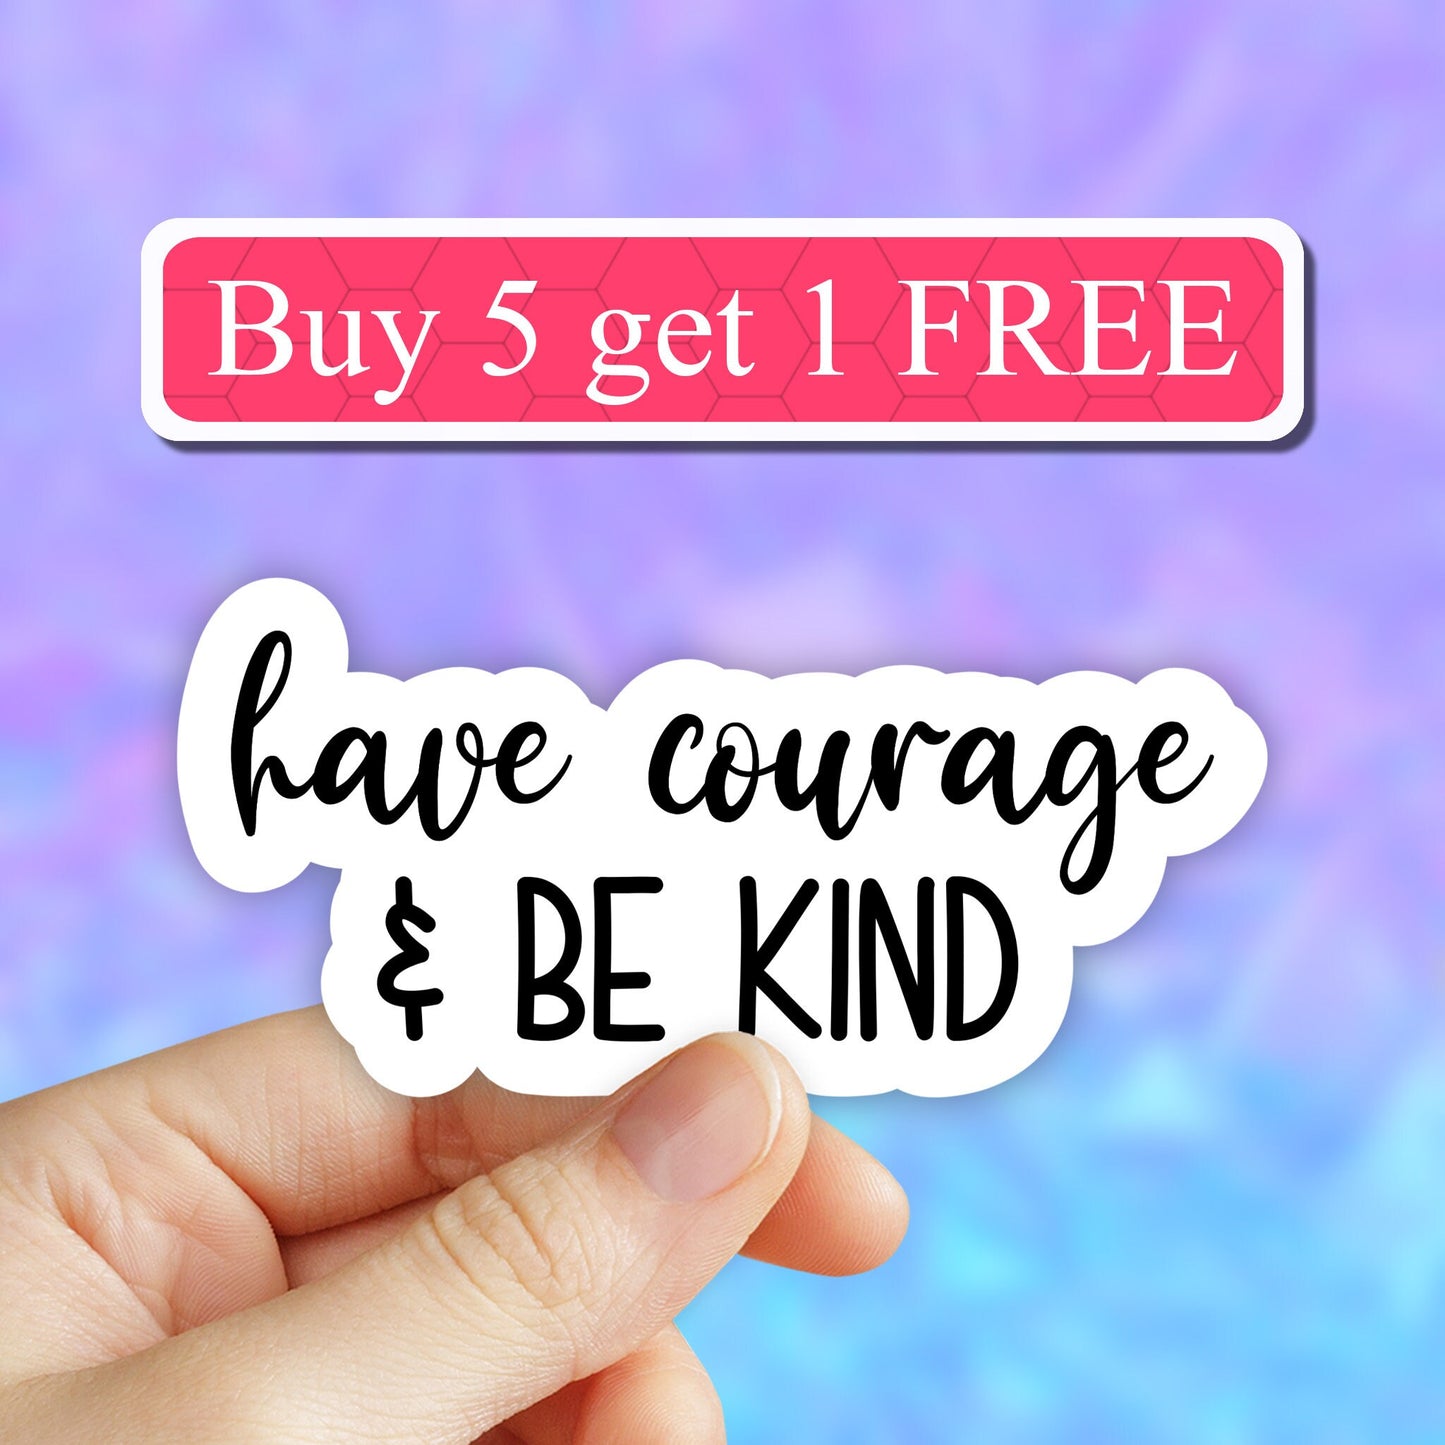 Have courage and be kind Sticker, Laptop Decals, be kind human stickers, have courage sticker, motivational stickers, be happy courage decal